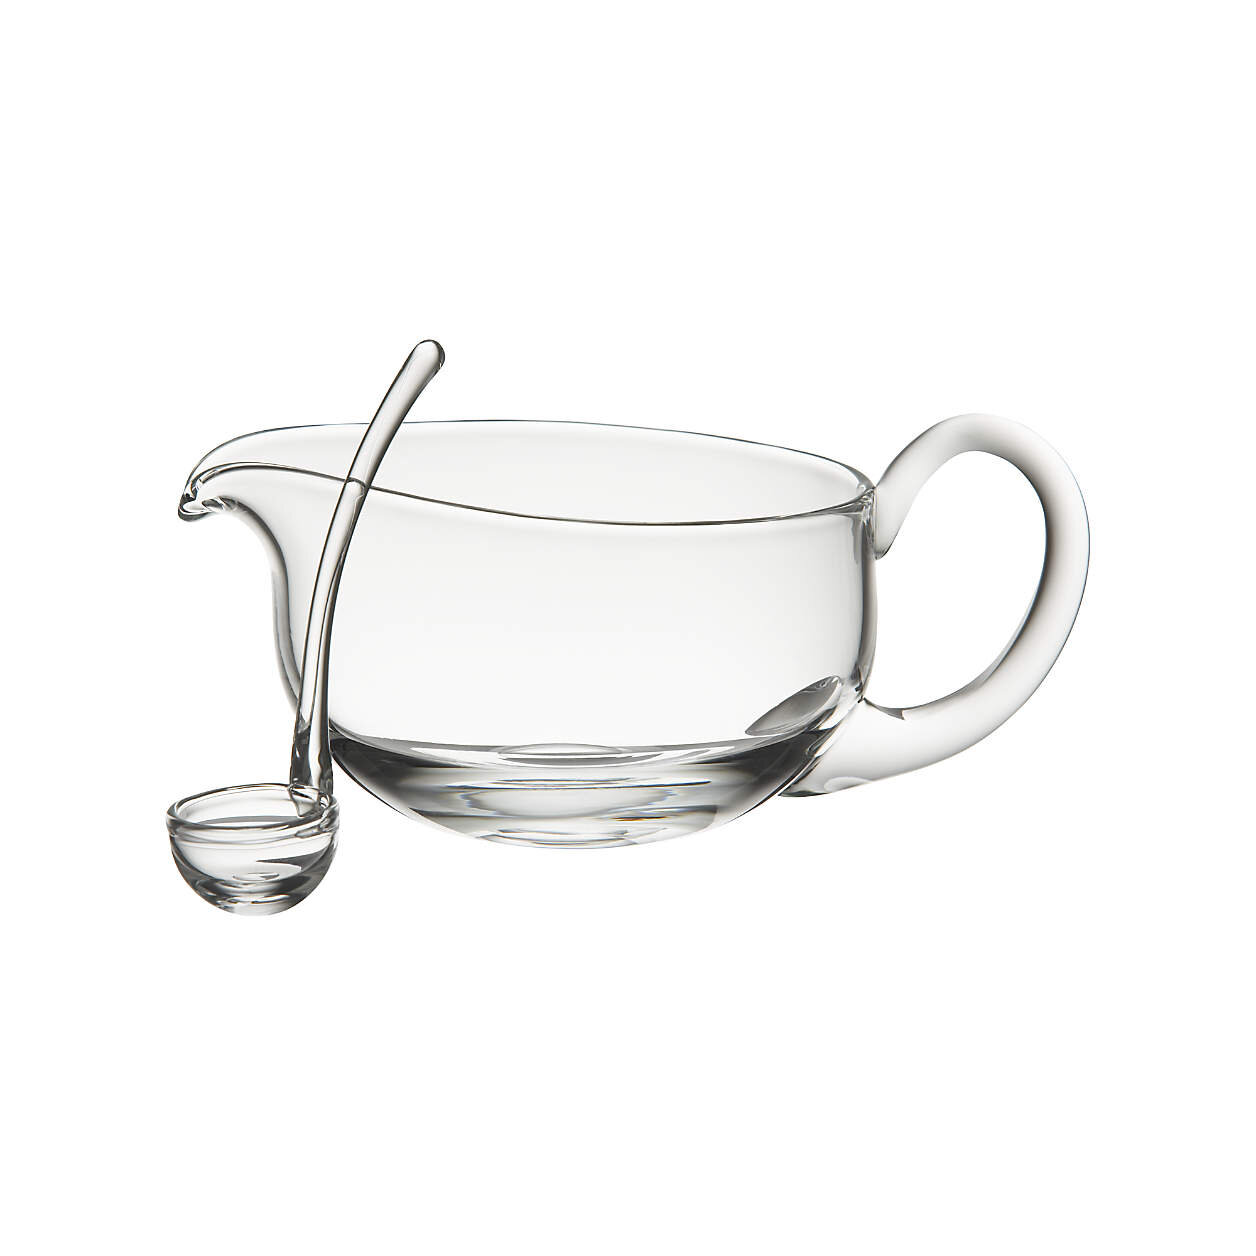 Deluxe Glass Gravy Boat with Ladle (EXCLUSIVE)